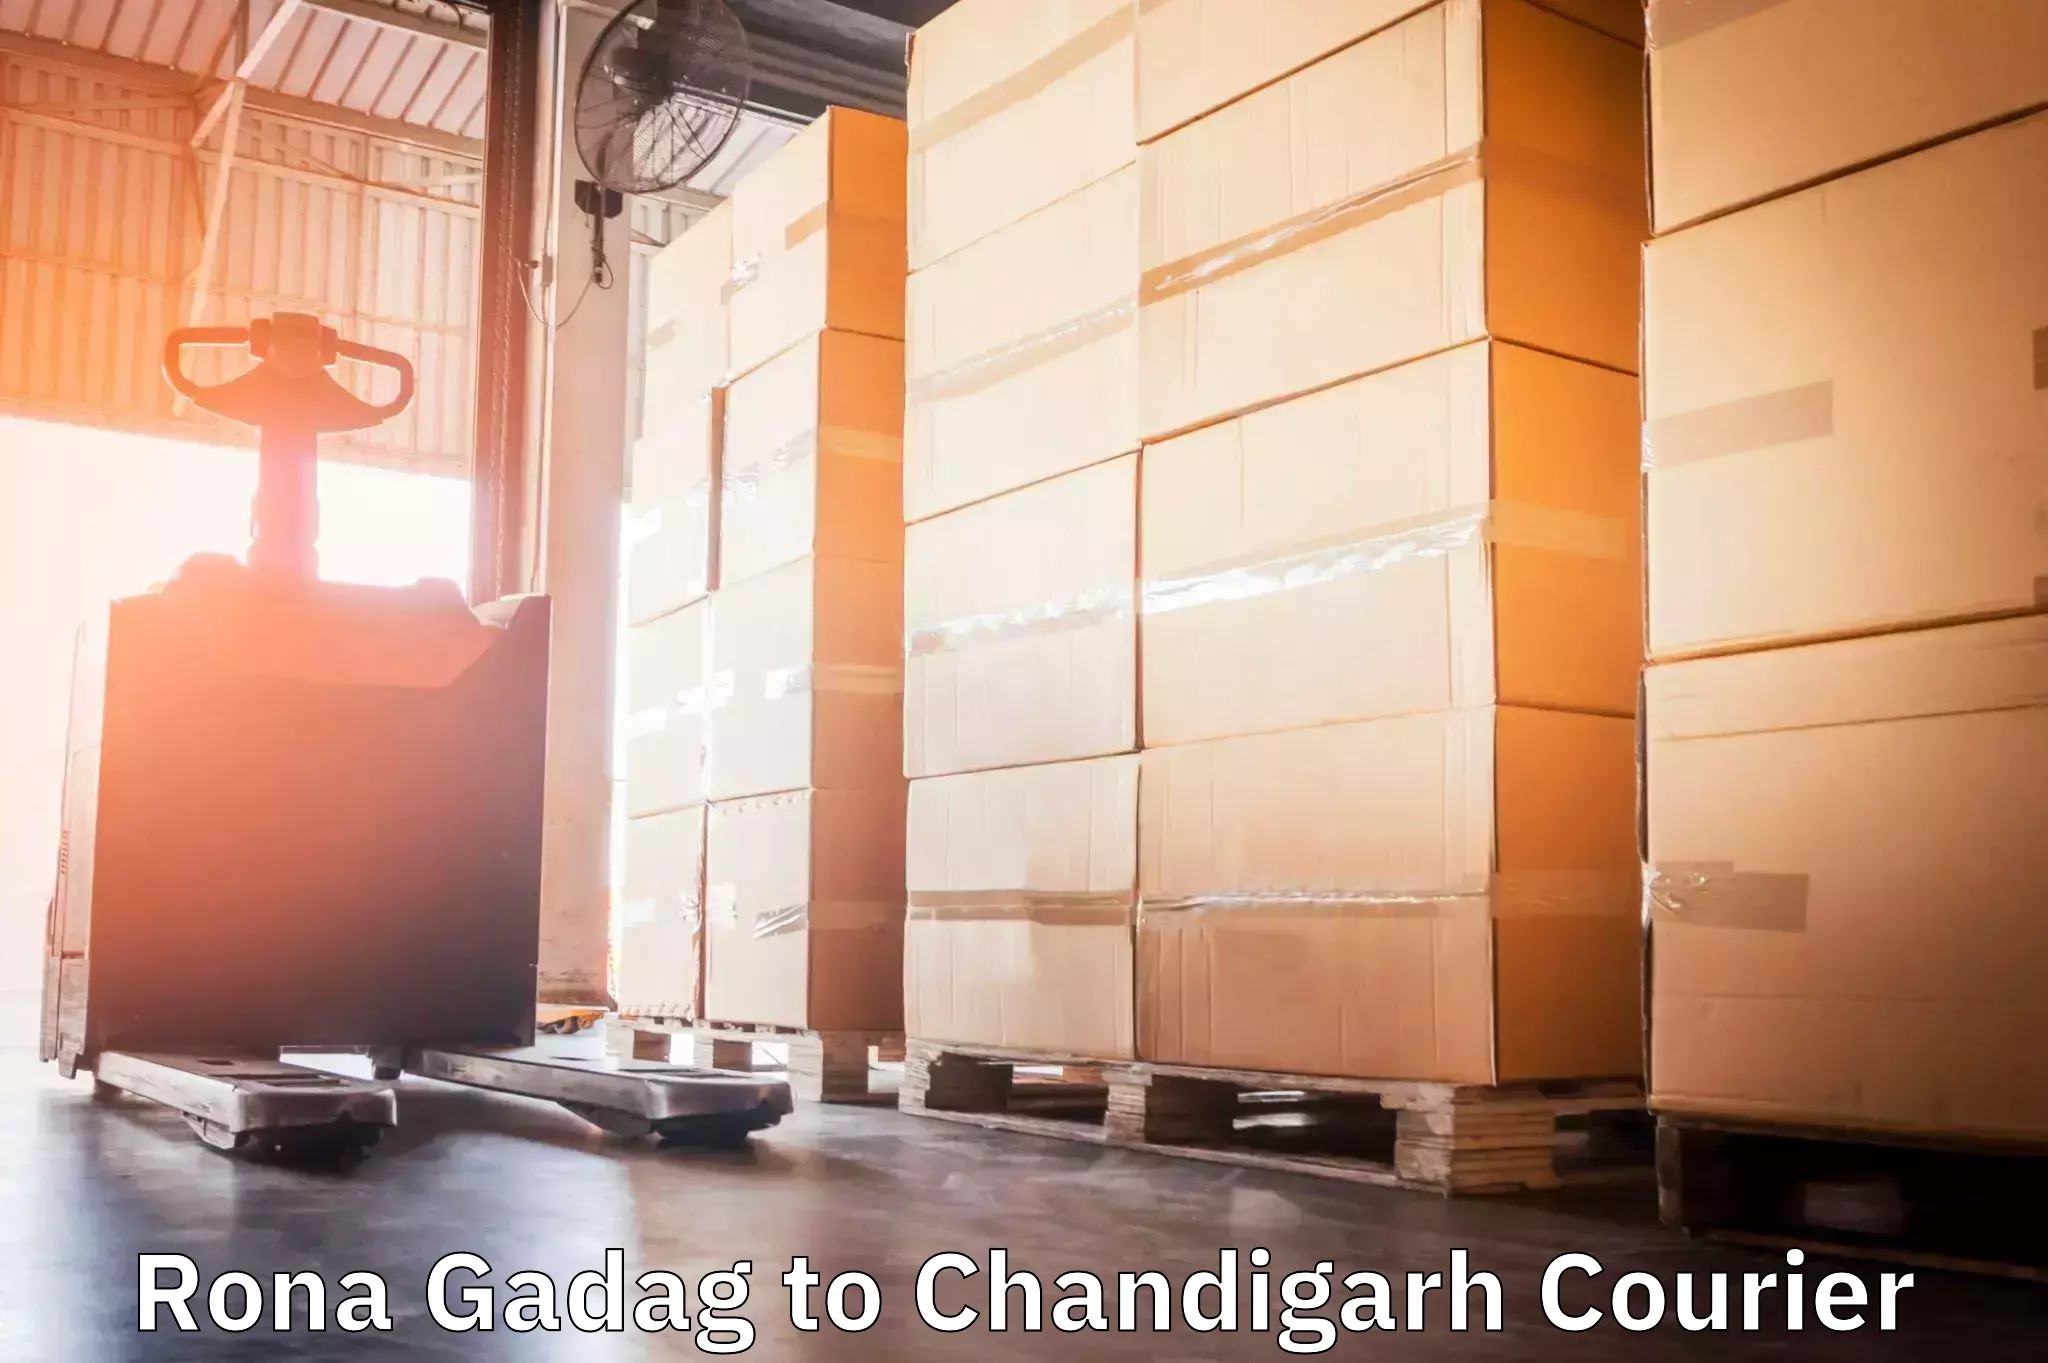 Advanced package delivery Rona Gadag to Chandigarh